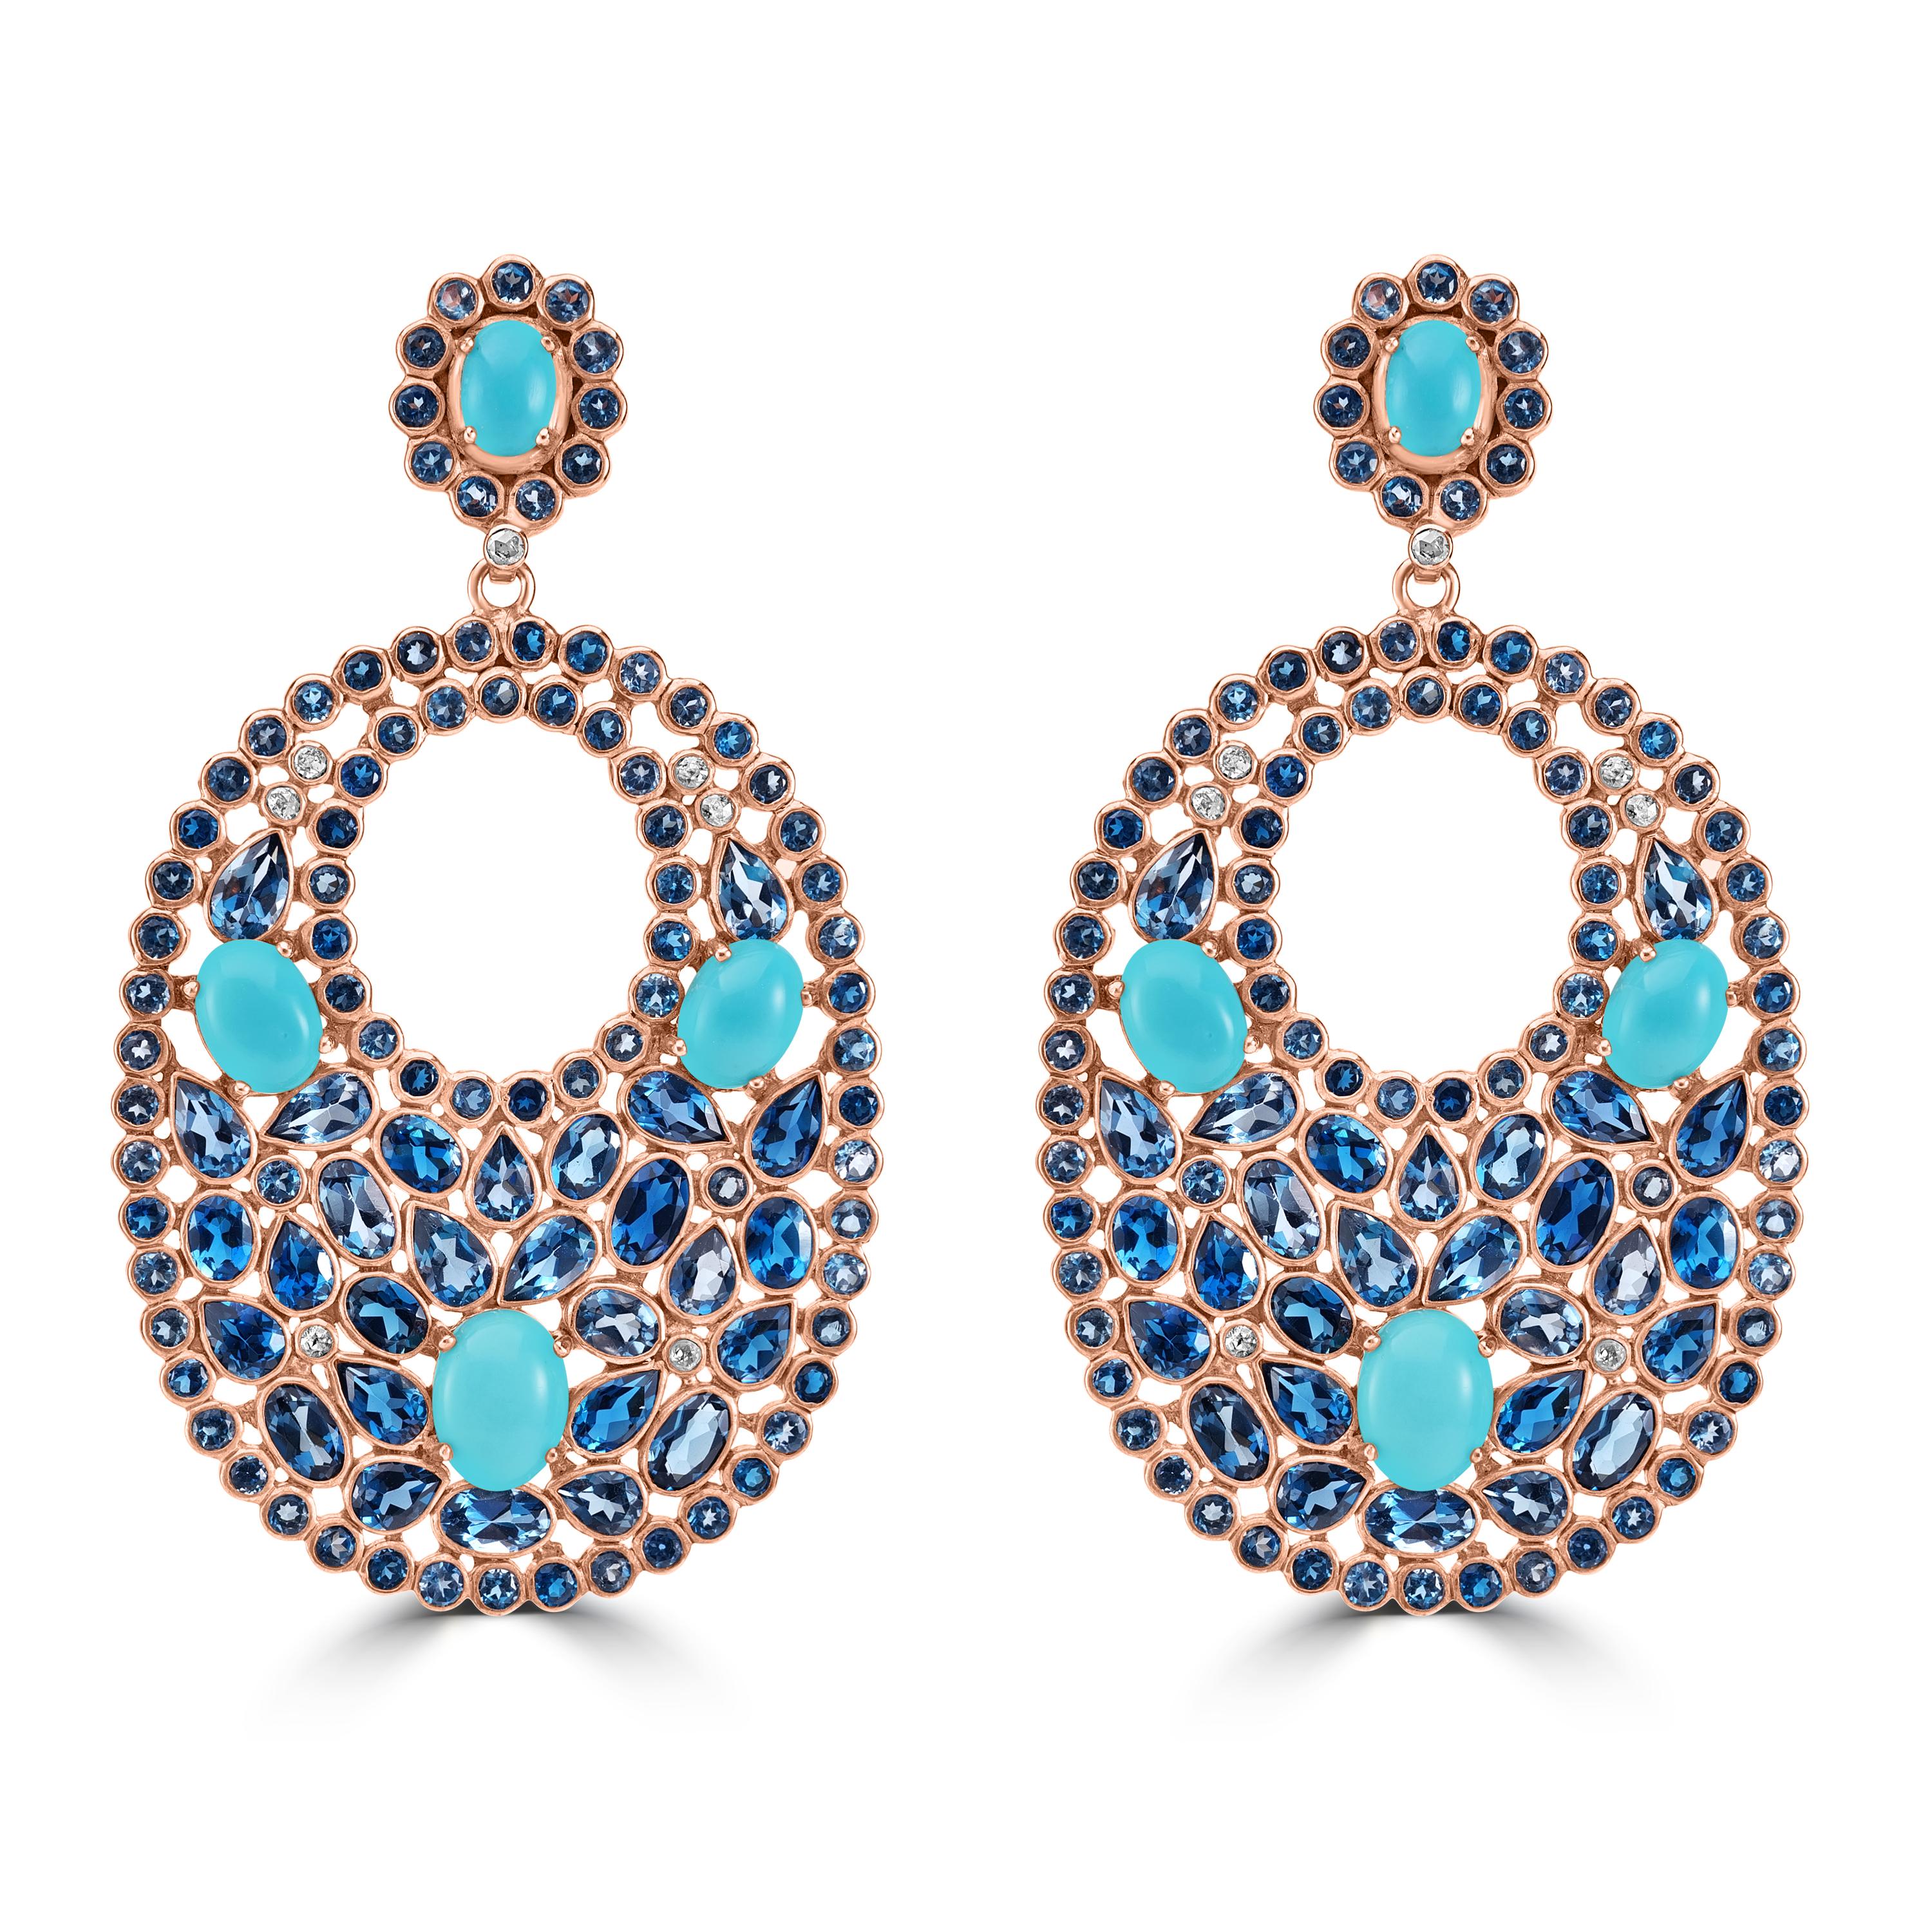 Deck out your earlobes in these majestic Victorian London Blue Topaz, Turquoise, and Diamond Drops by Gemistry. These enchanting earrings feature an intricate circular design that masterfully combines dazzling London Blue Topaz and luminous